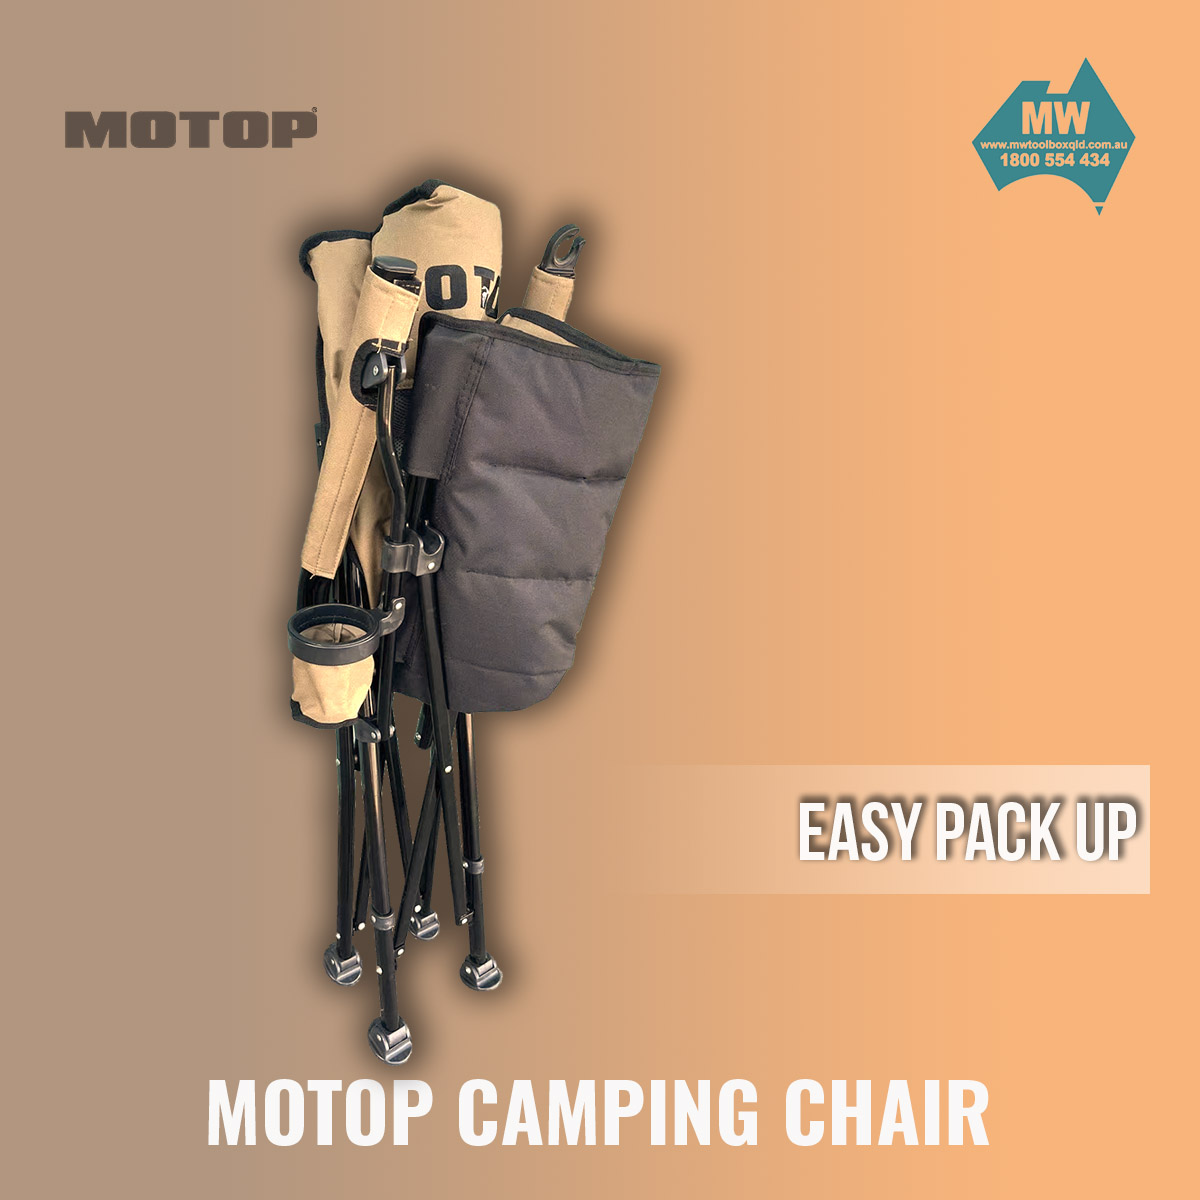 Motop-Camping-Chair-7